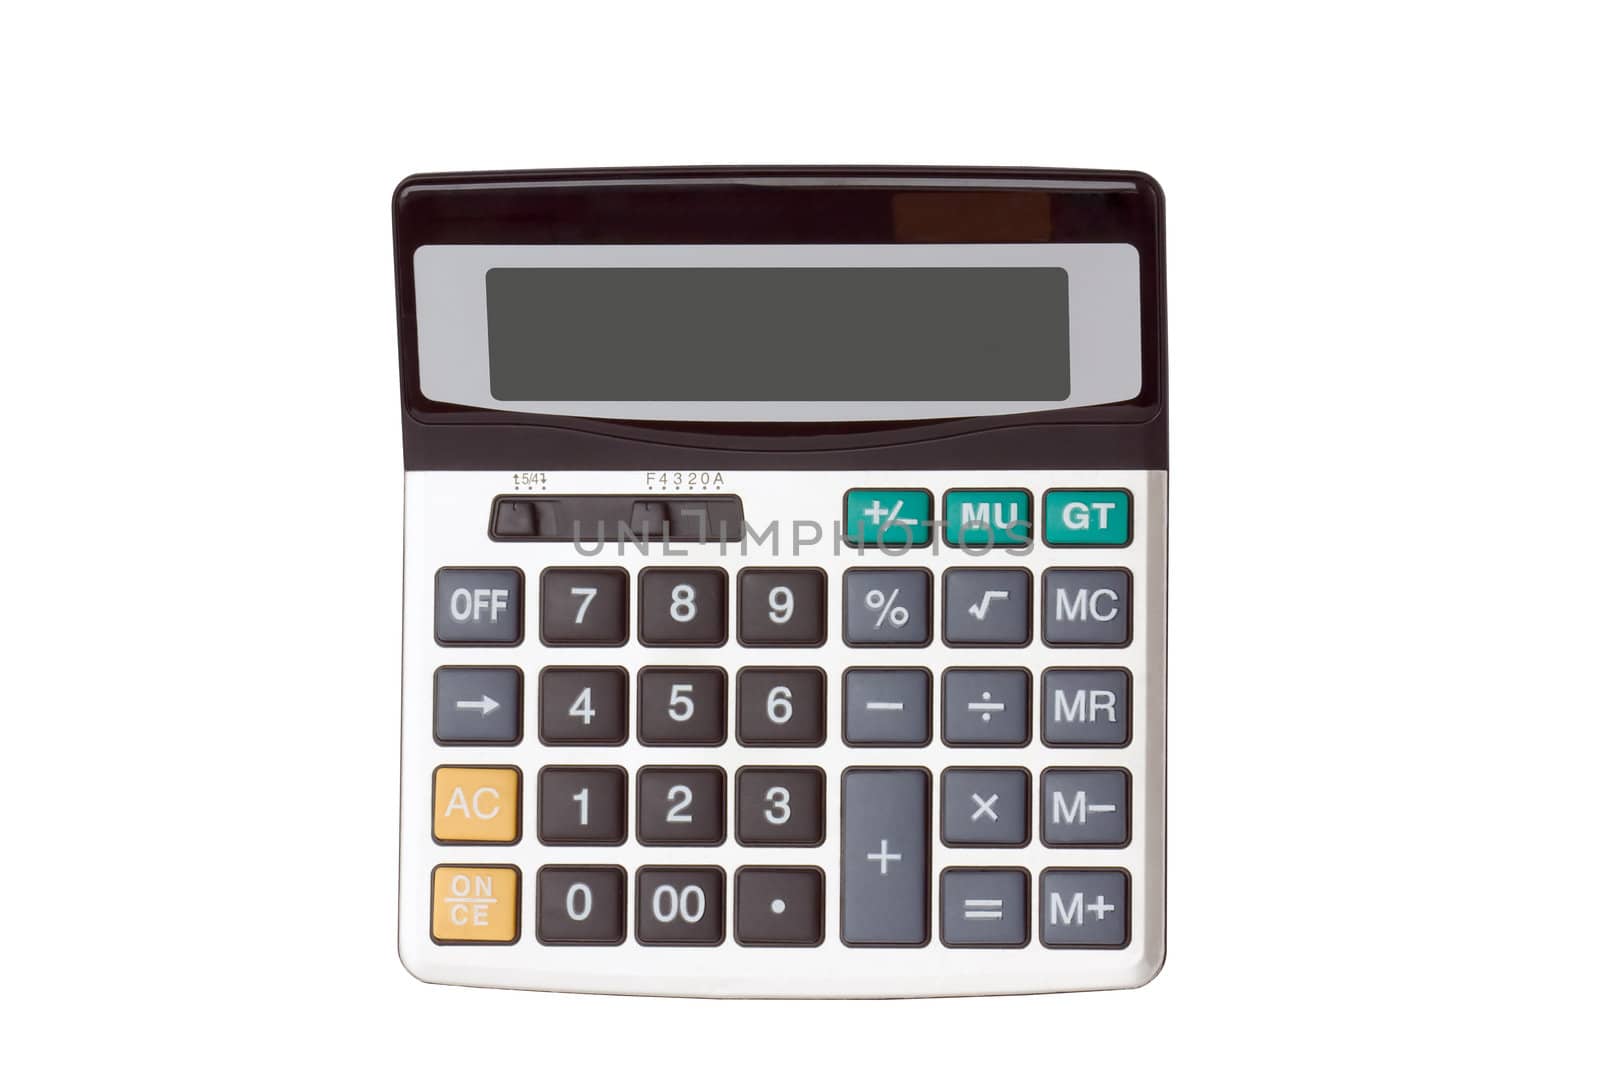 Modern electronic calculator, isolated on a white background.